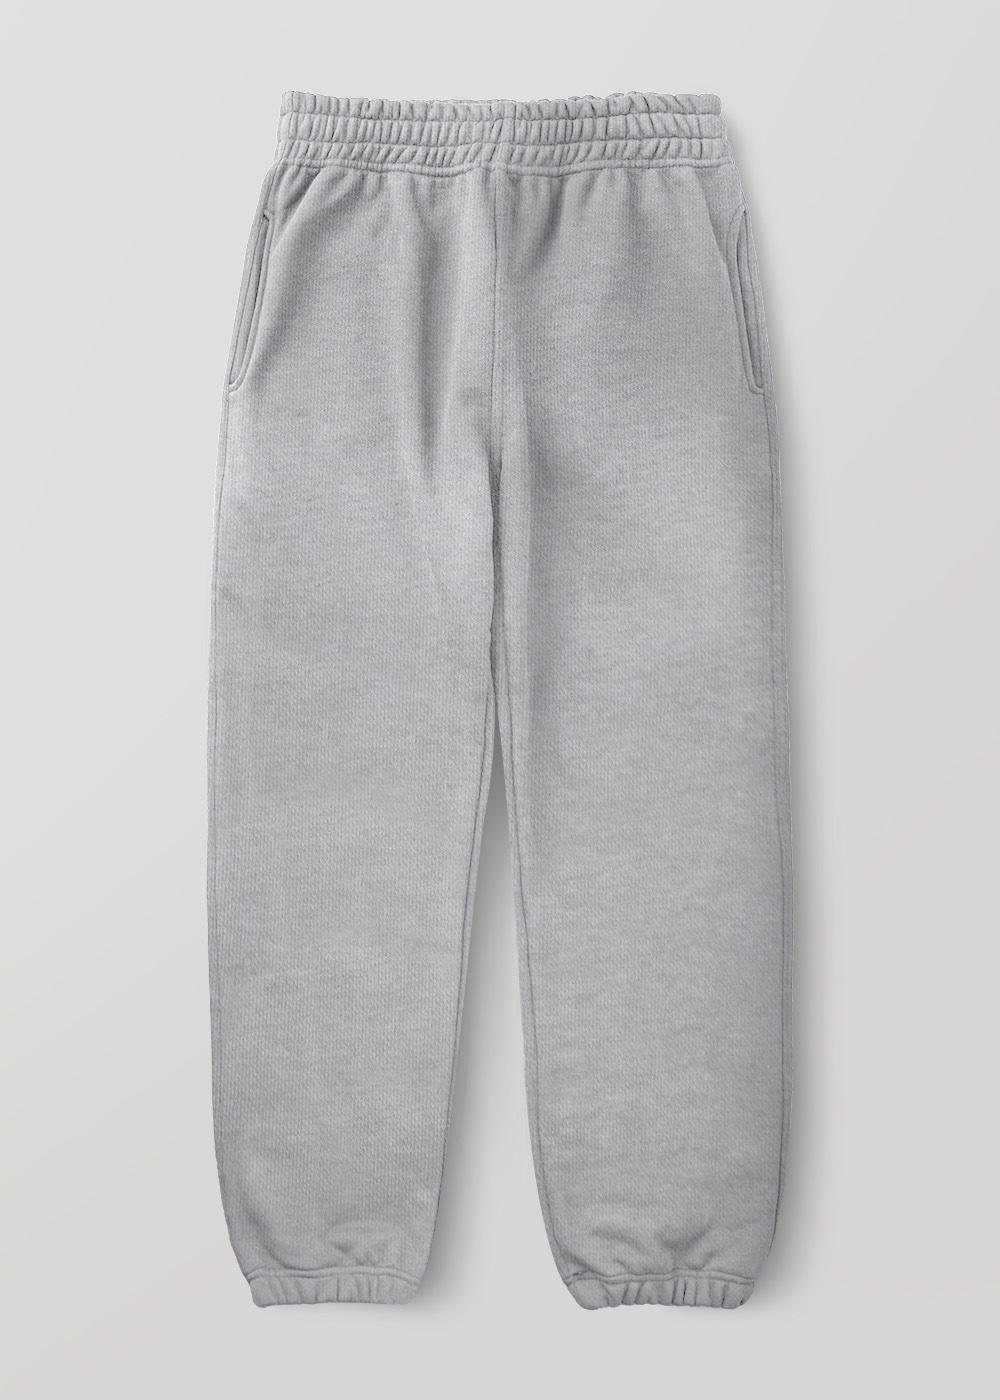 Silky Finished Heavy Cotton Jogger Pants _ gray